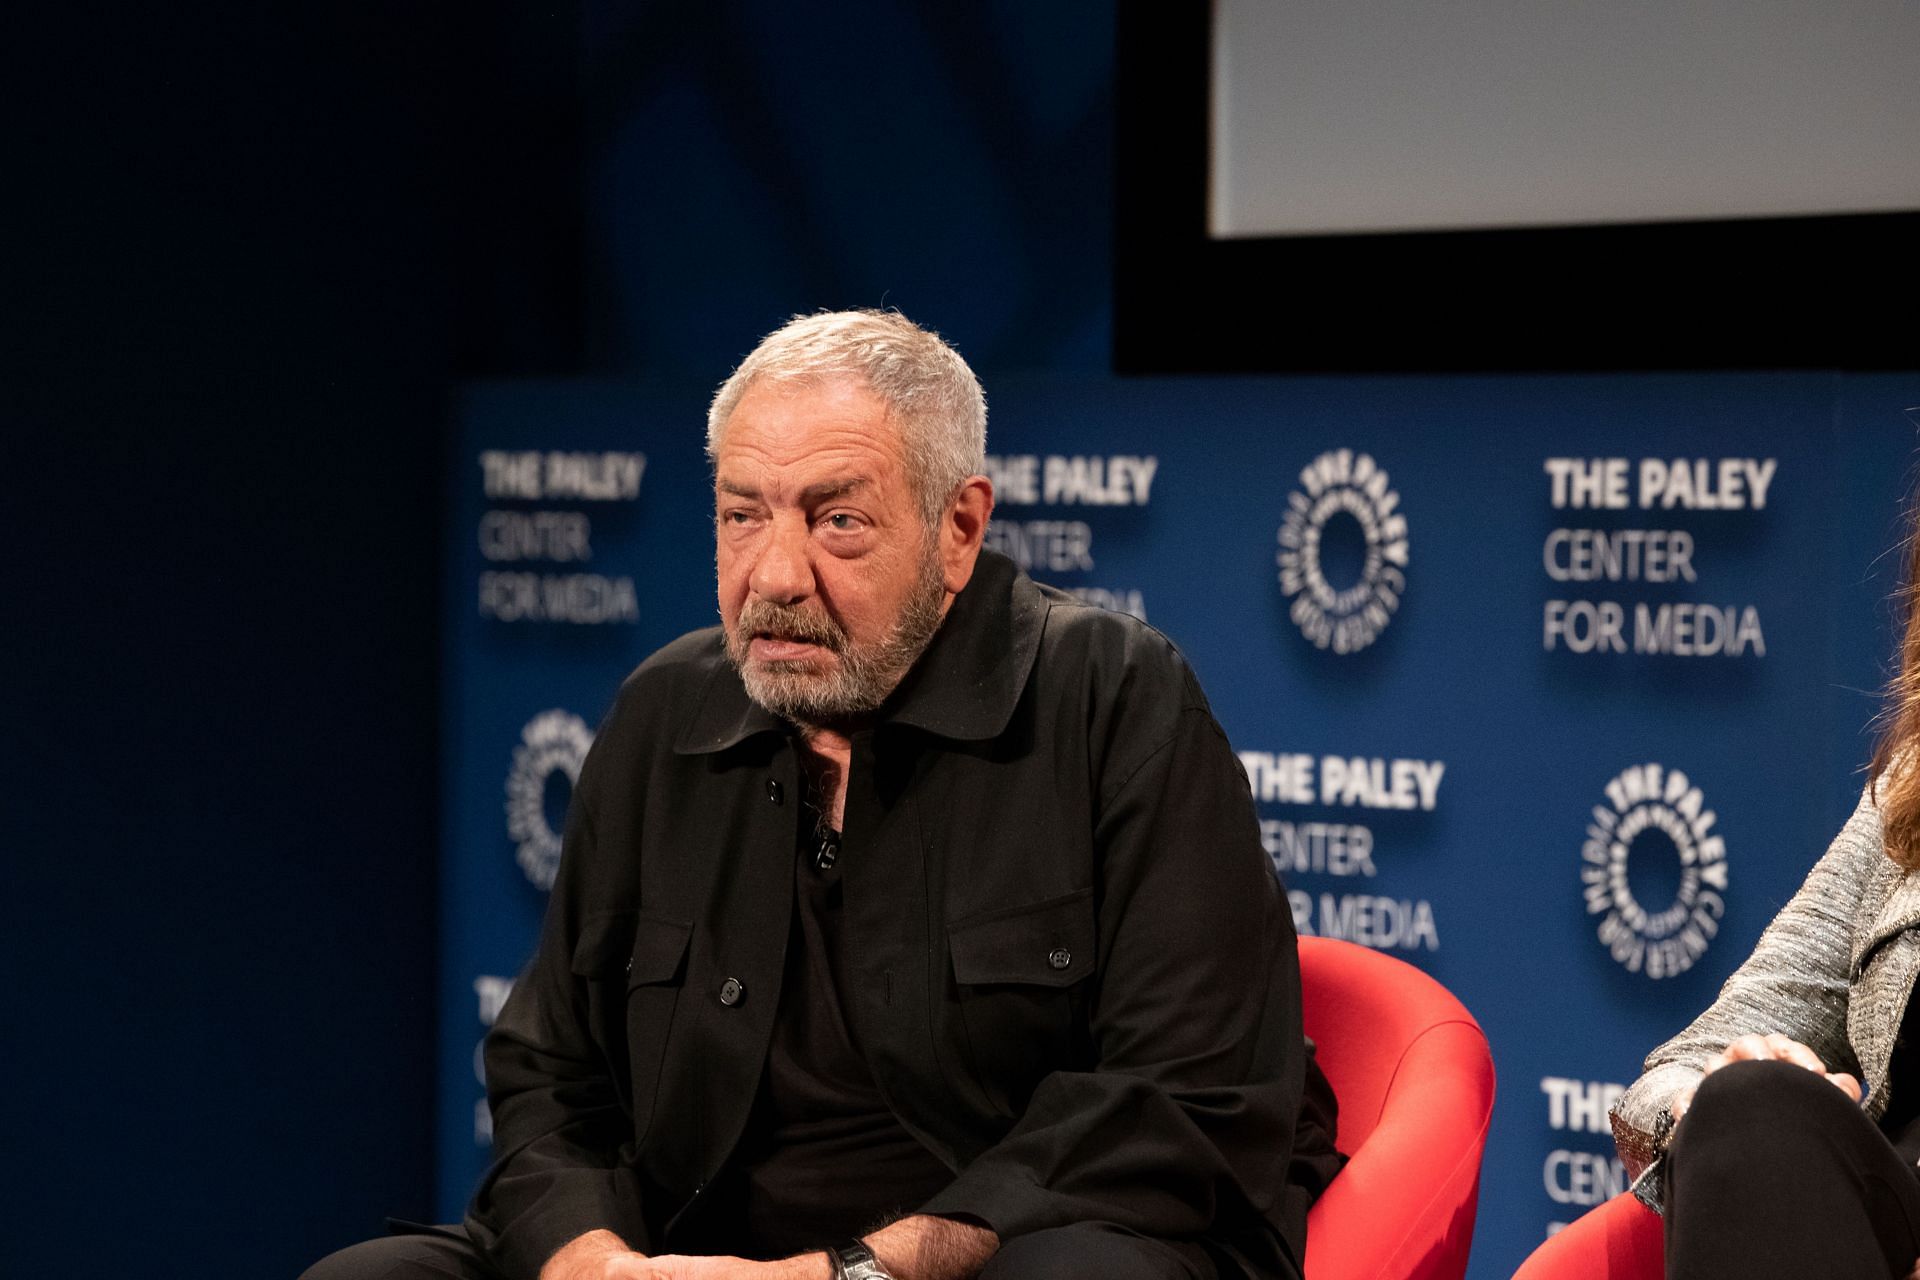 The Paley Center For Media Presents: Creating Great Characters: Dick Wolf And Mariska Hargitay - Panel